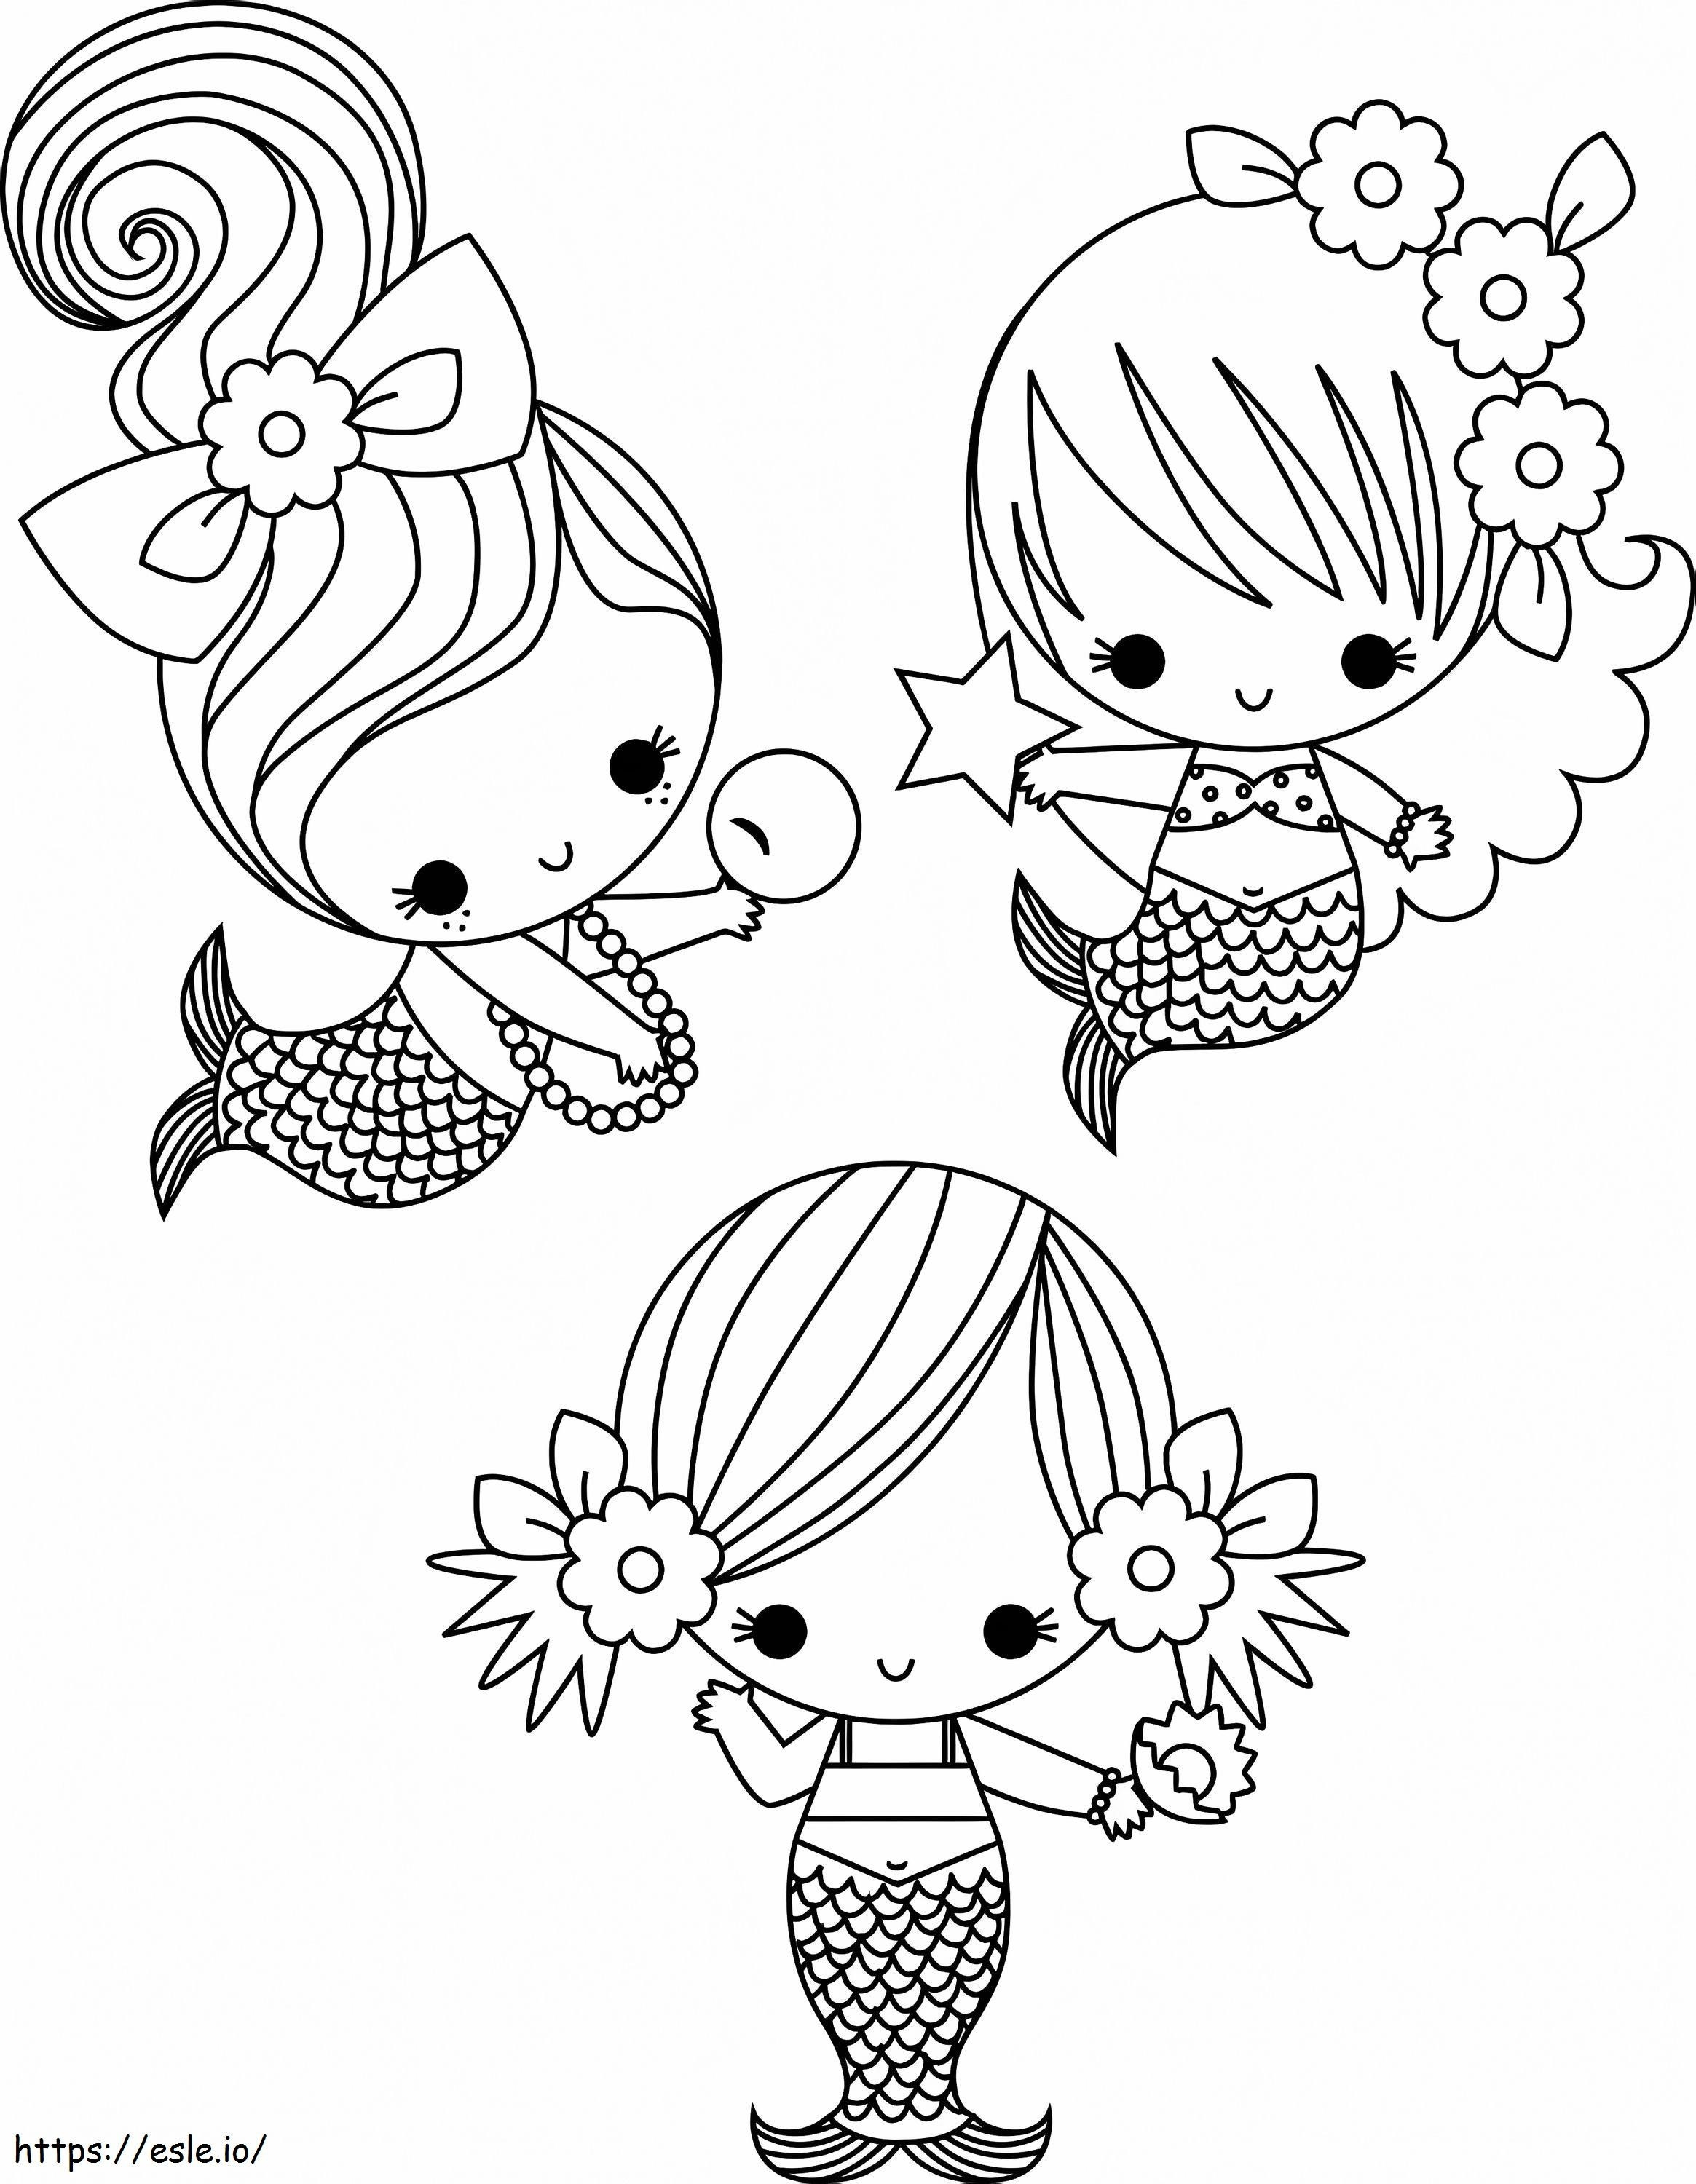 Three Little Mermaid coloring page